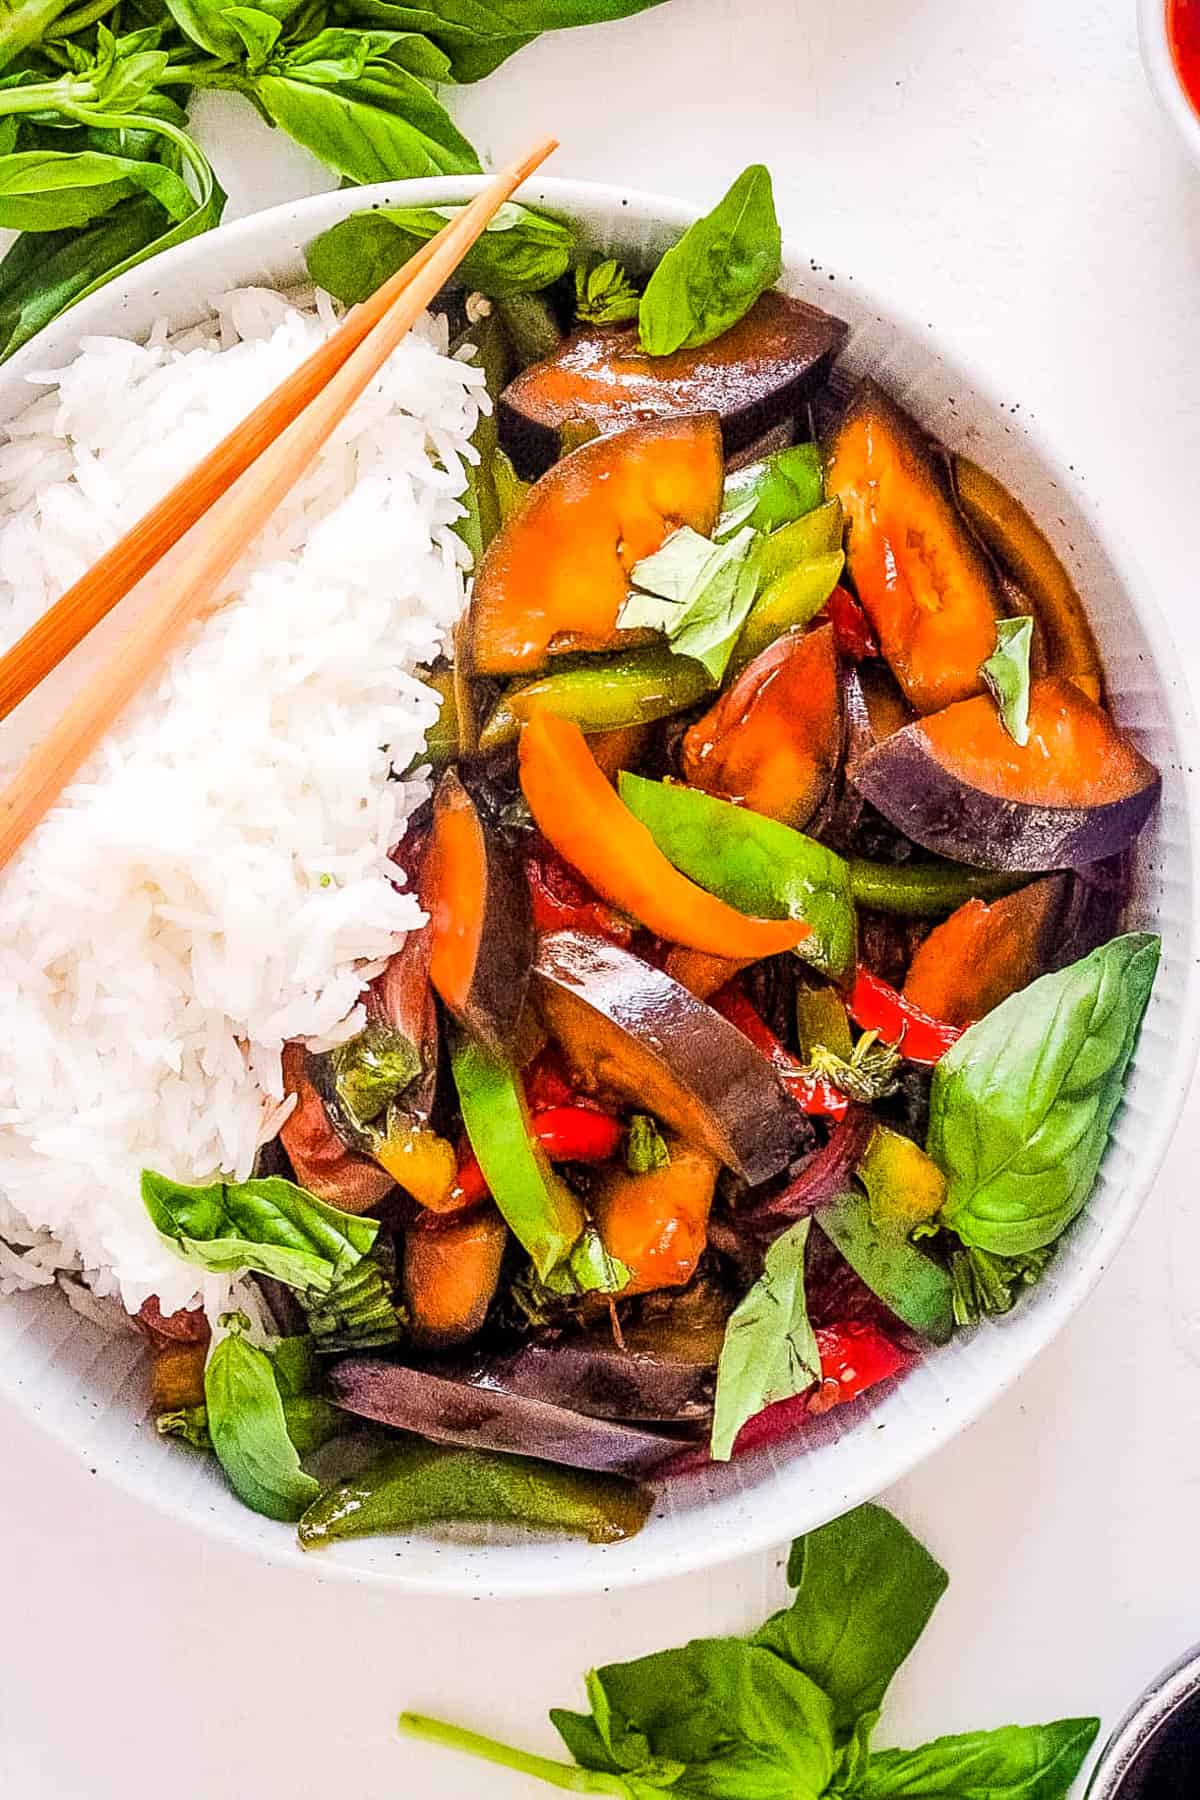 Thai basil eggplant in a white bowl, served with rice and c،psticks on the side.